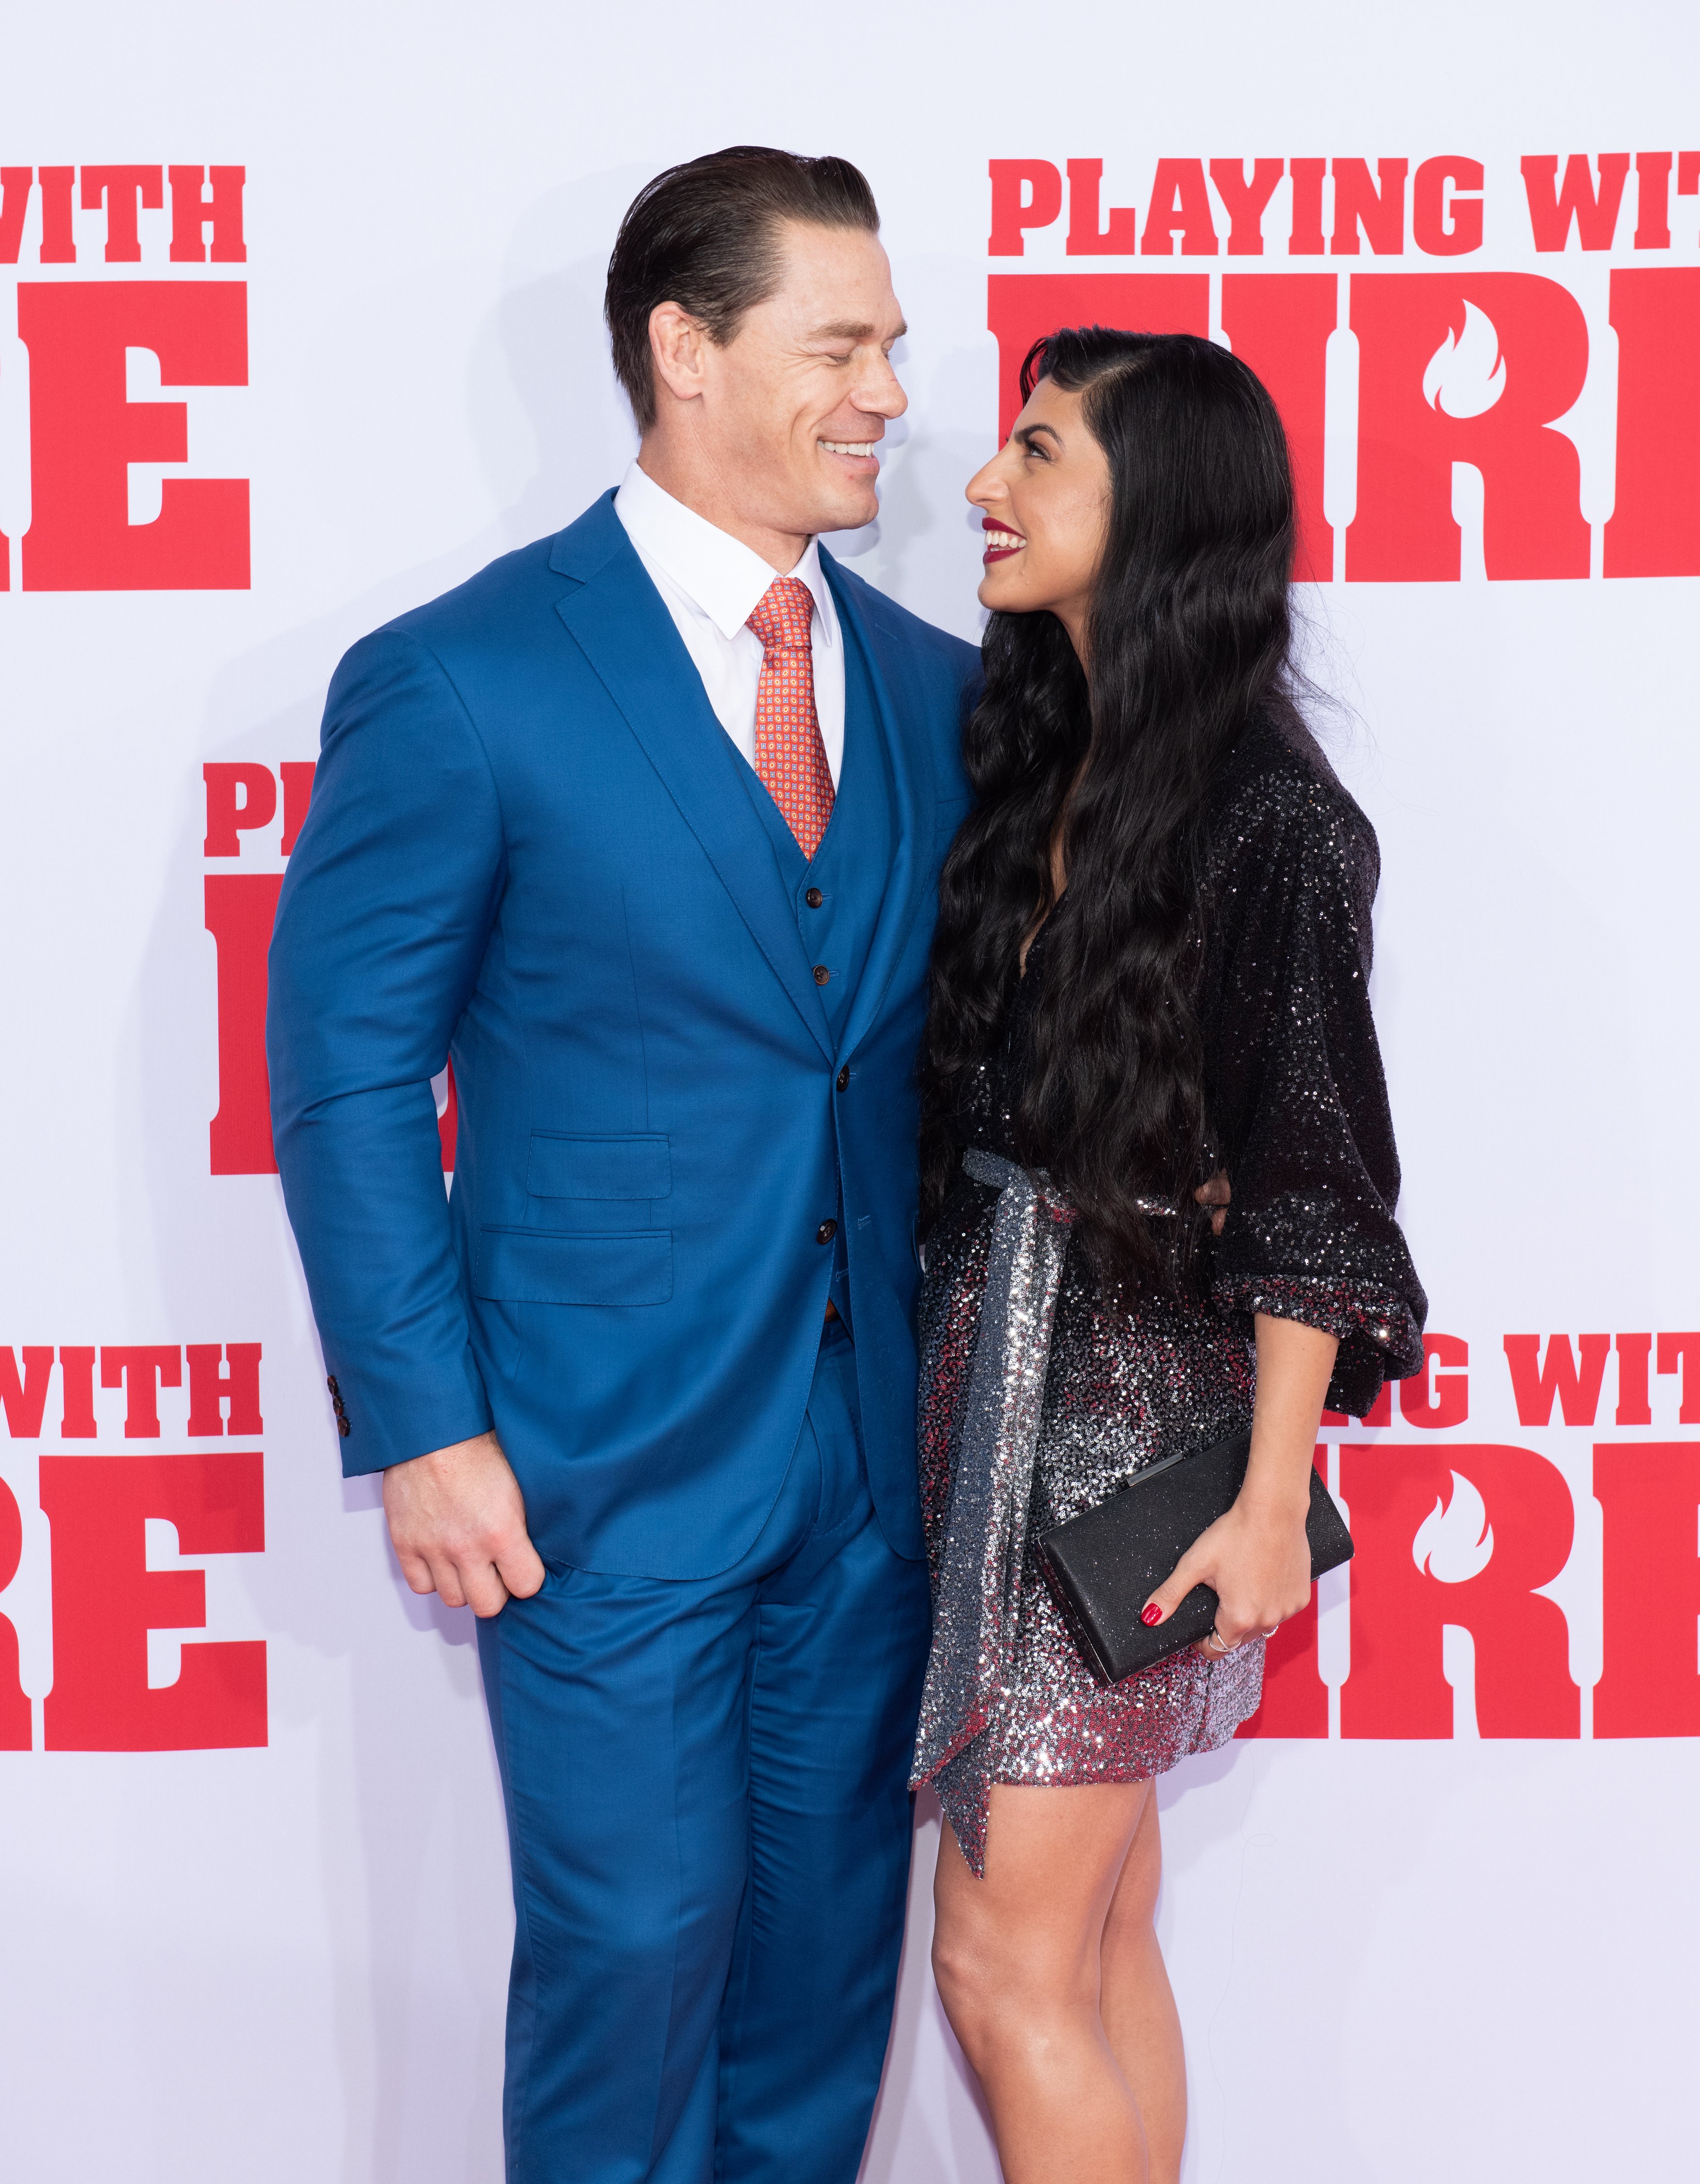 John Cena and girlfriend Shay Shariatzadeh at the "Playing With Fire" New York premiere on October 26, 2019. | Source: Getty Images.